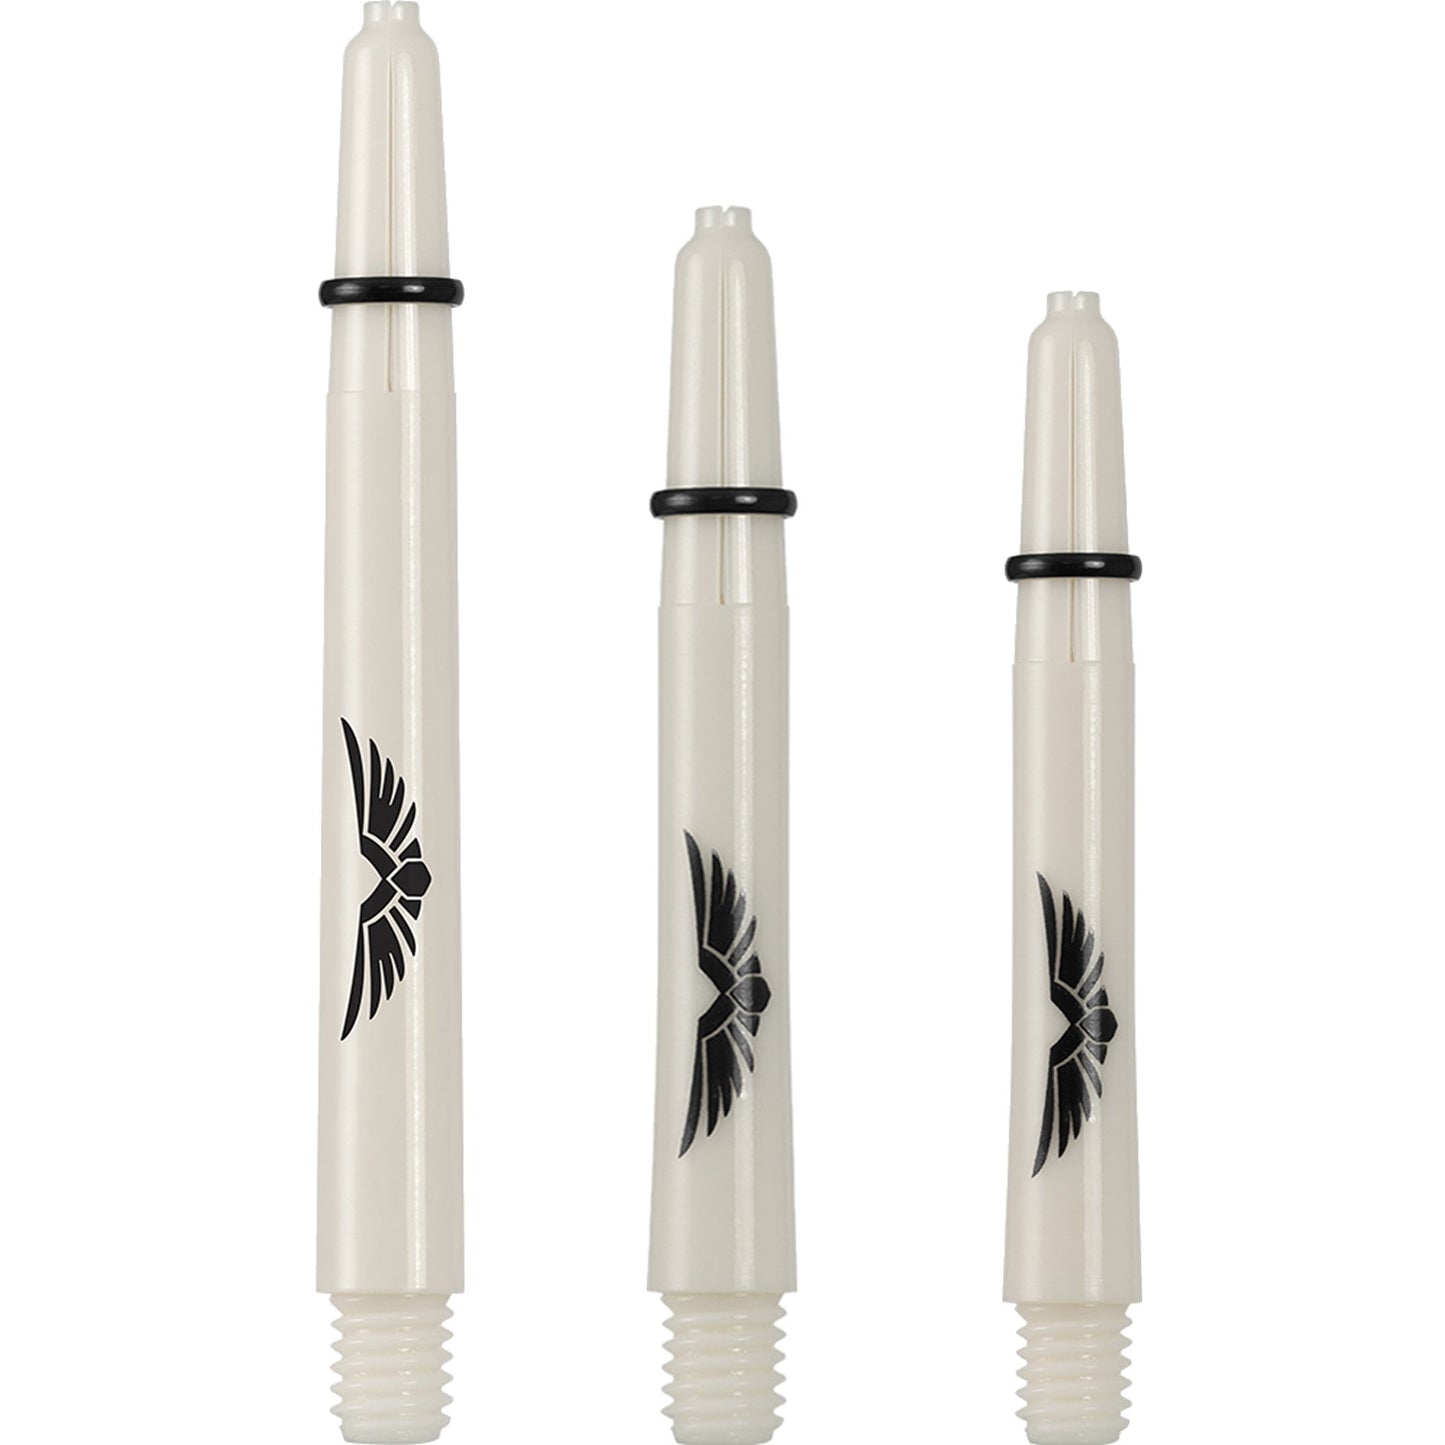 Shot Eagle Claw Dart Shafts - with Machined Rings - Strong Polycarbonate Stems - Bone White